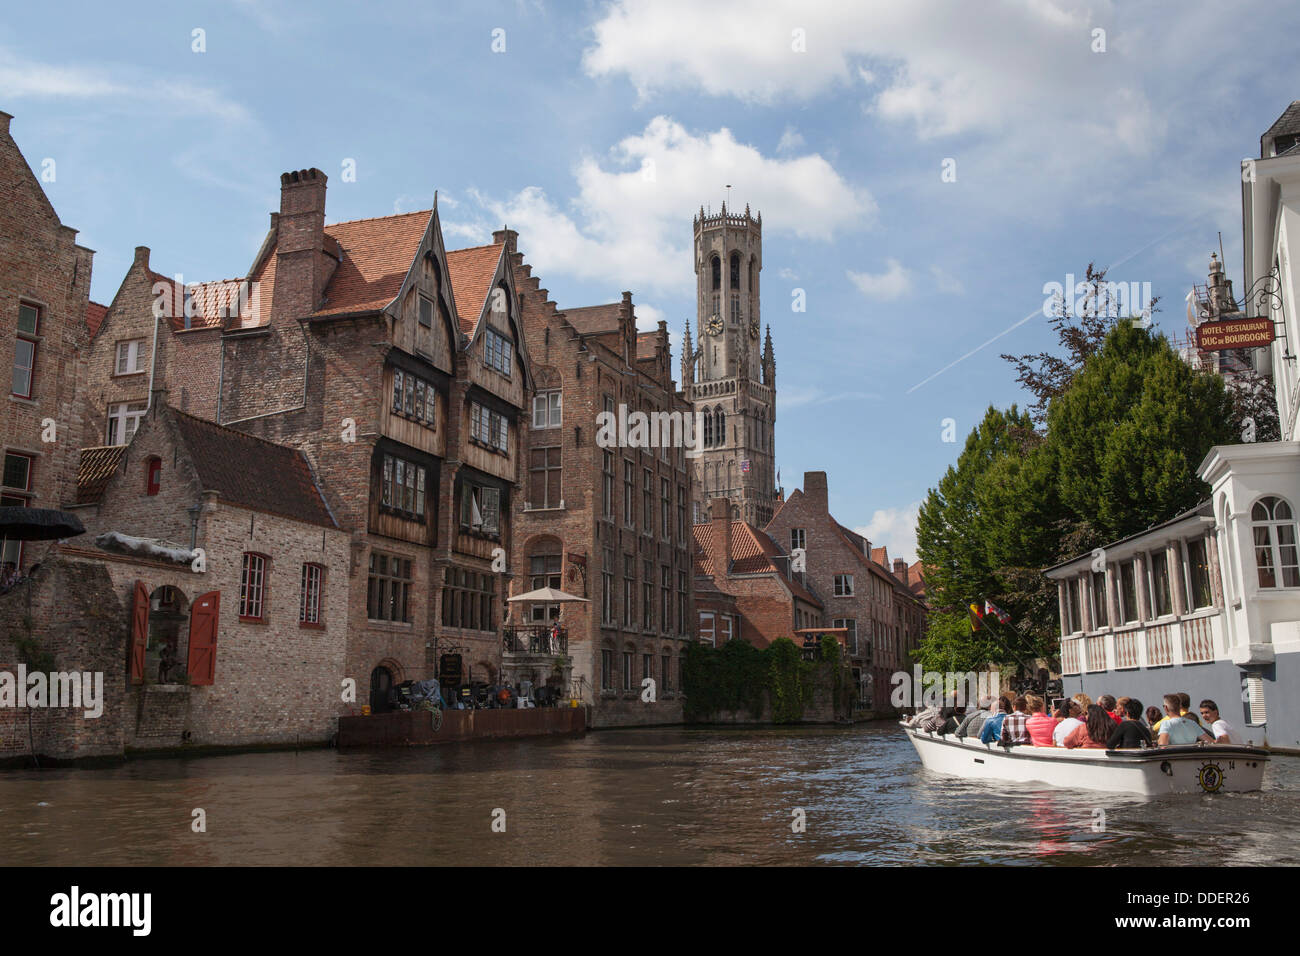 Sightseeing boat in one of the canals of Brugge in Belgium with the Holy Blood Basilica (Heilig Bloedbasiliek) in background) Stock Photo